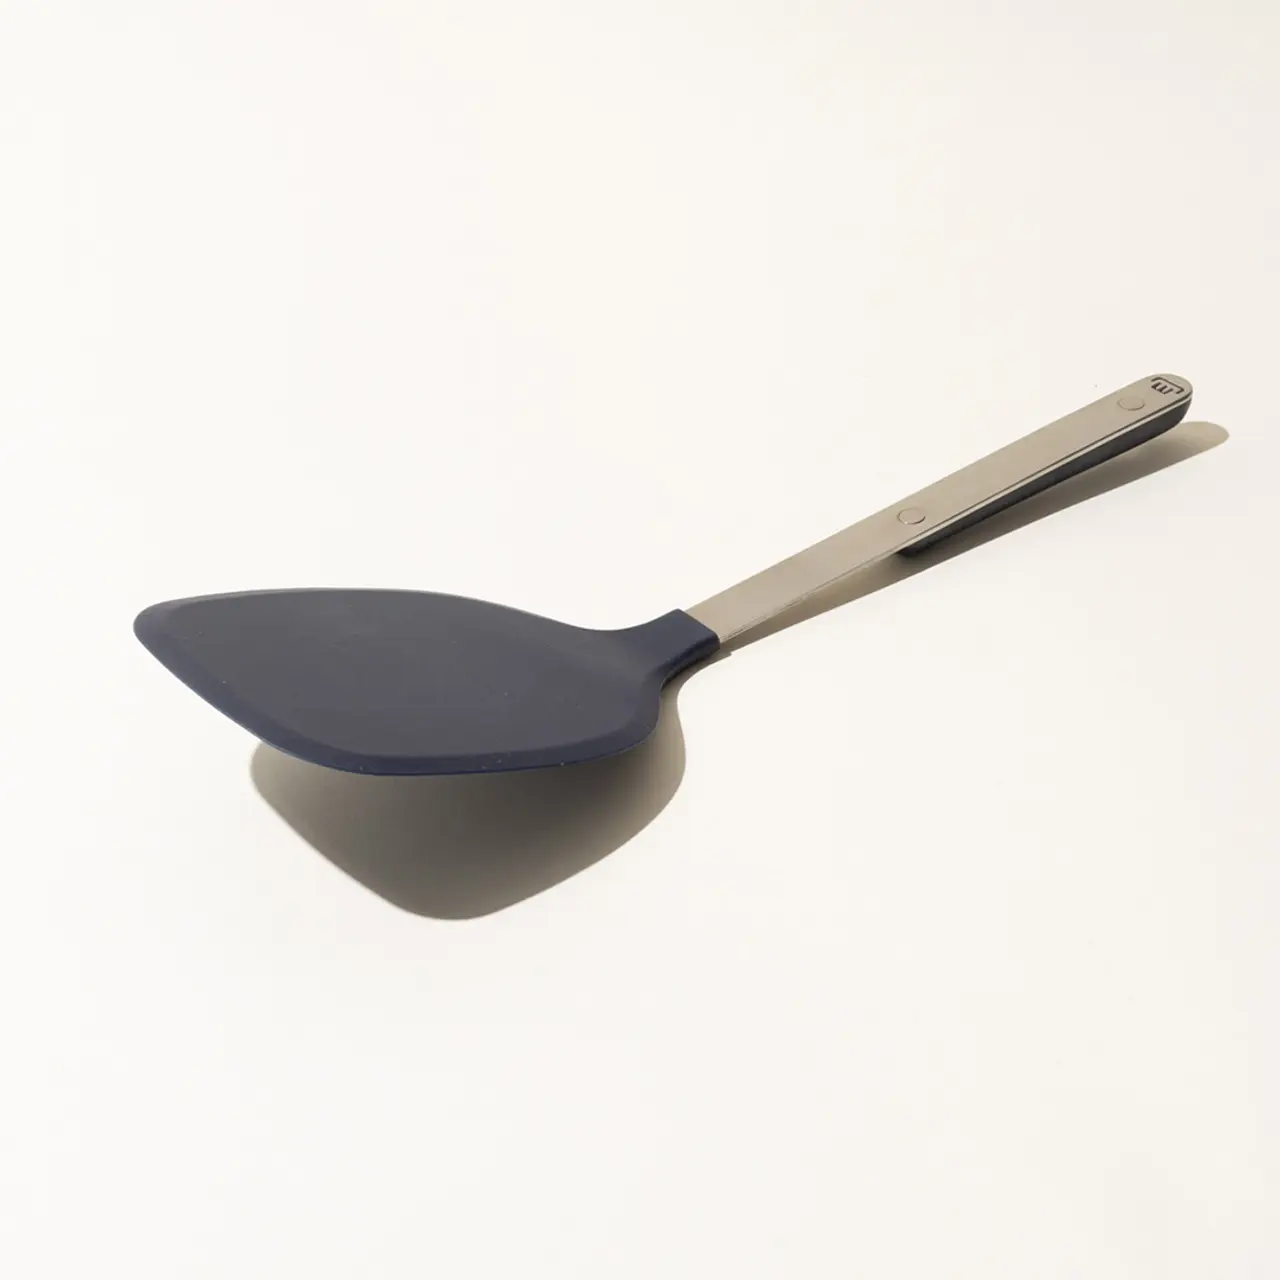 A silicone spatula with a stainless steel handle on a white background.